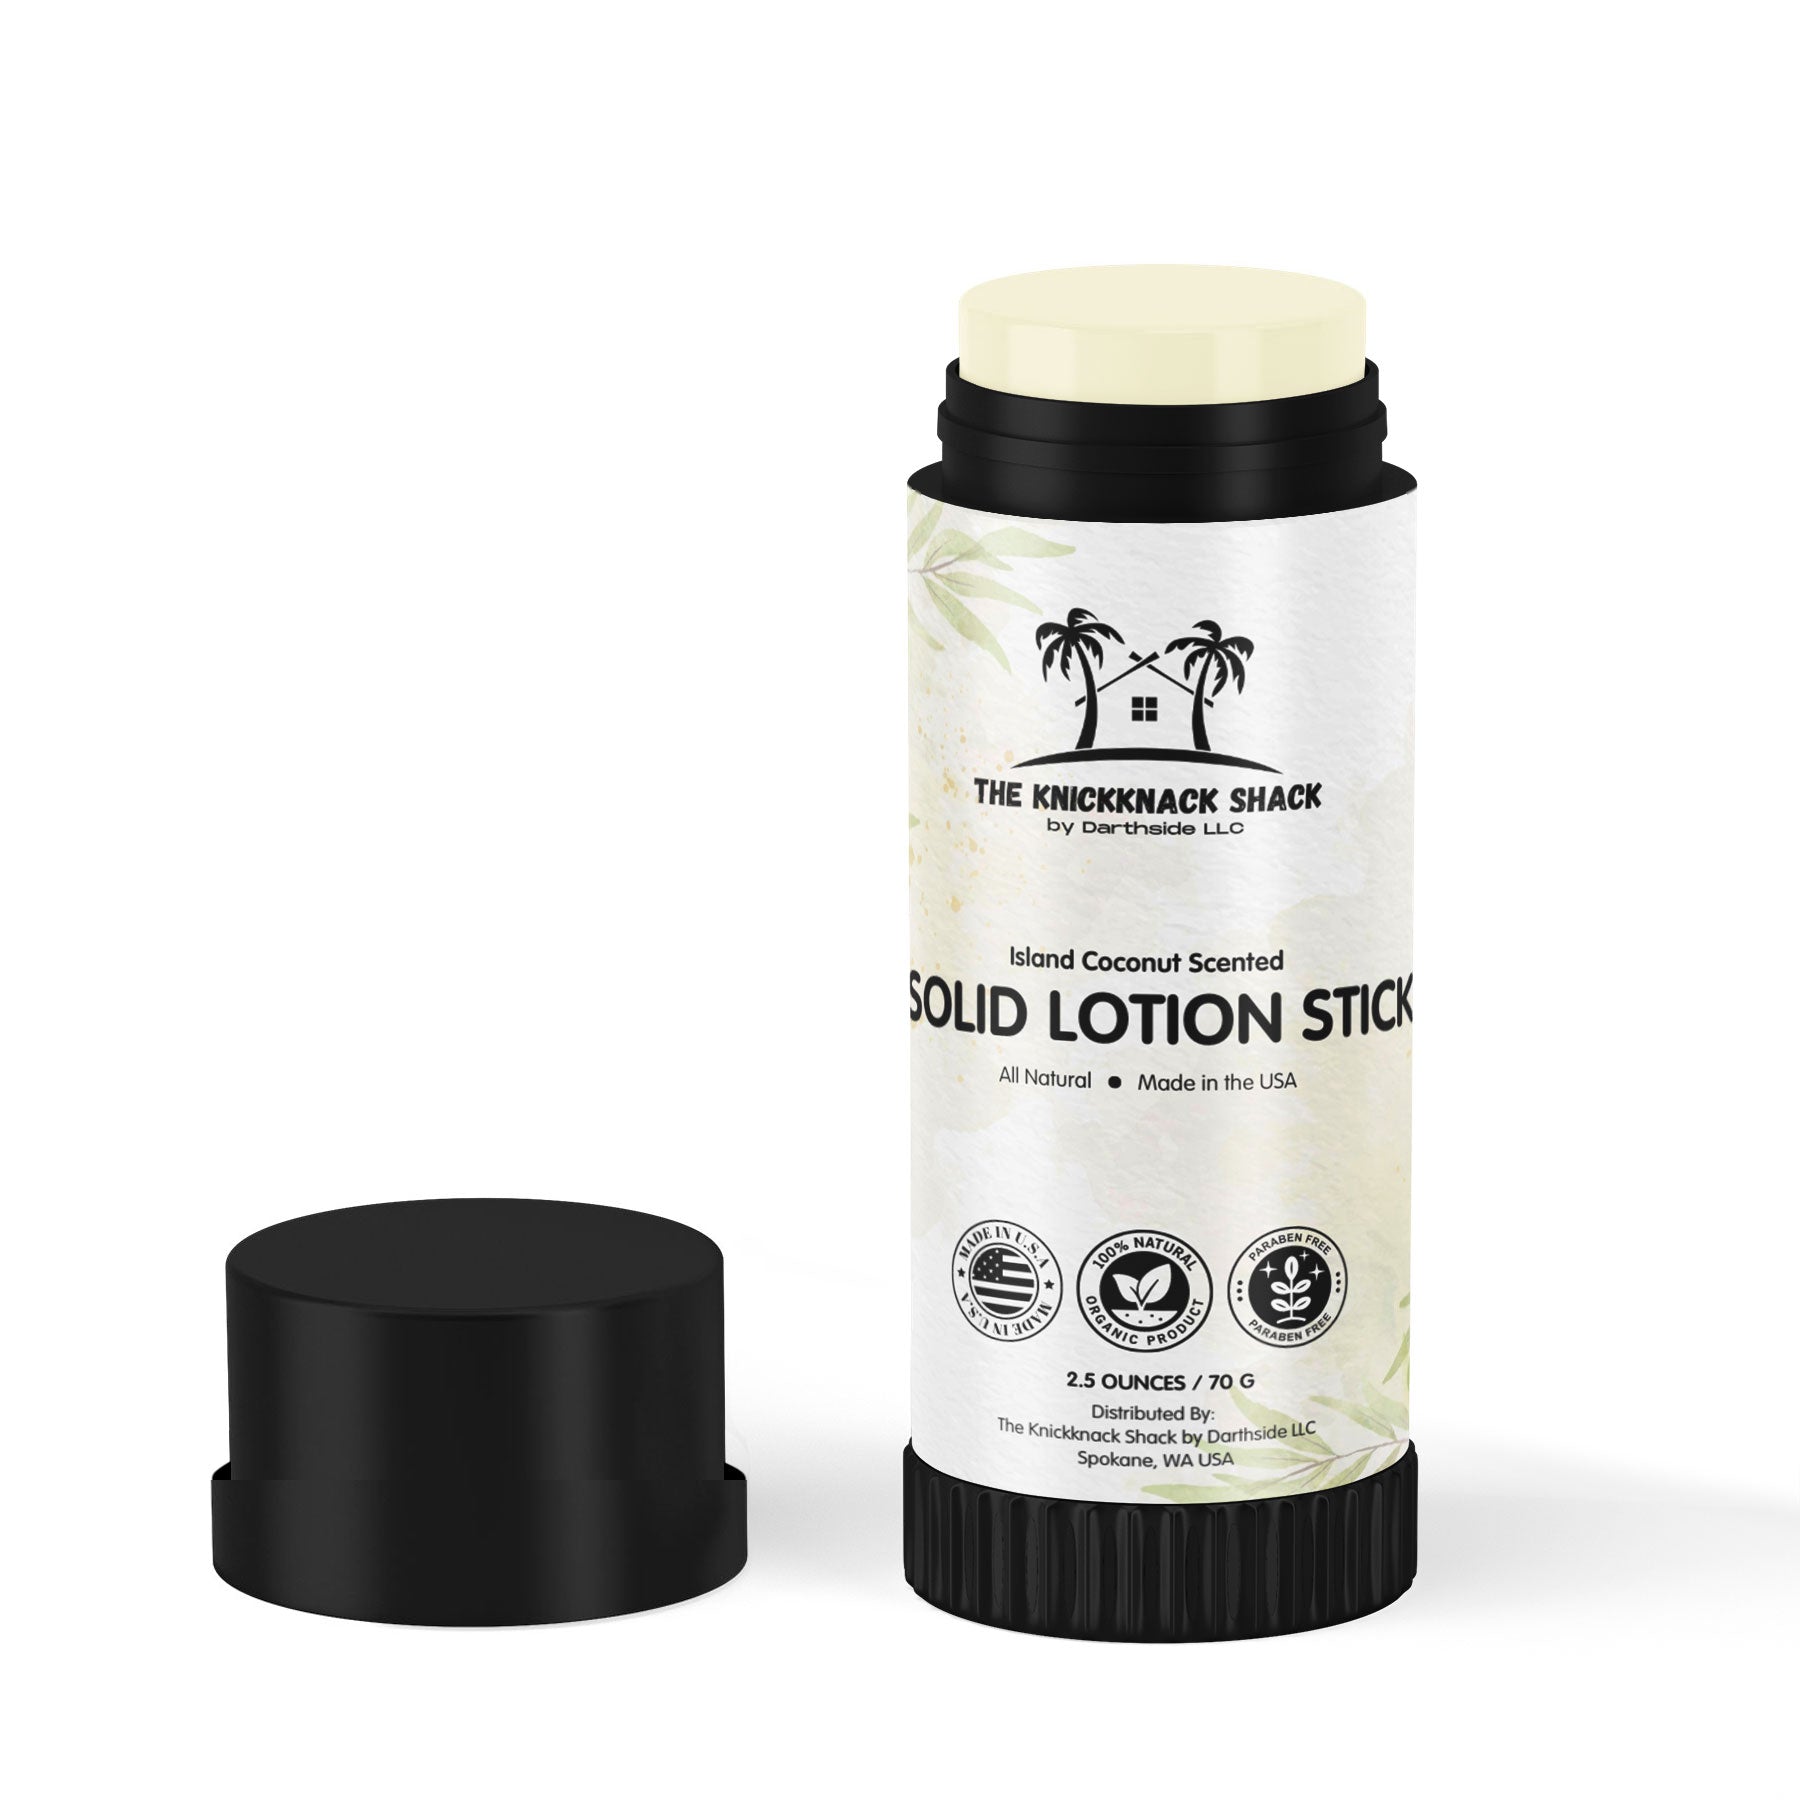 Island Coconut Scented Solid Lotion Stick